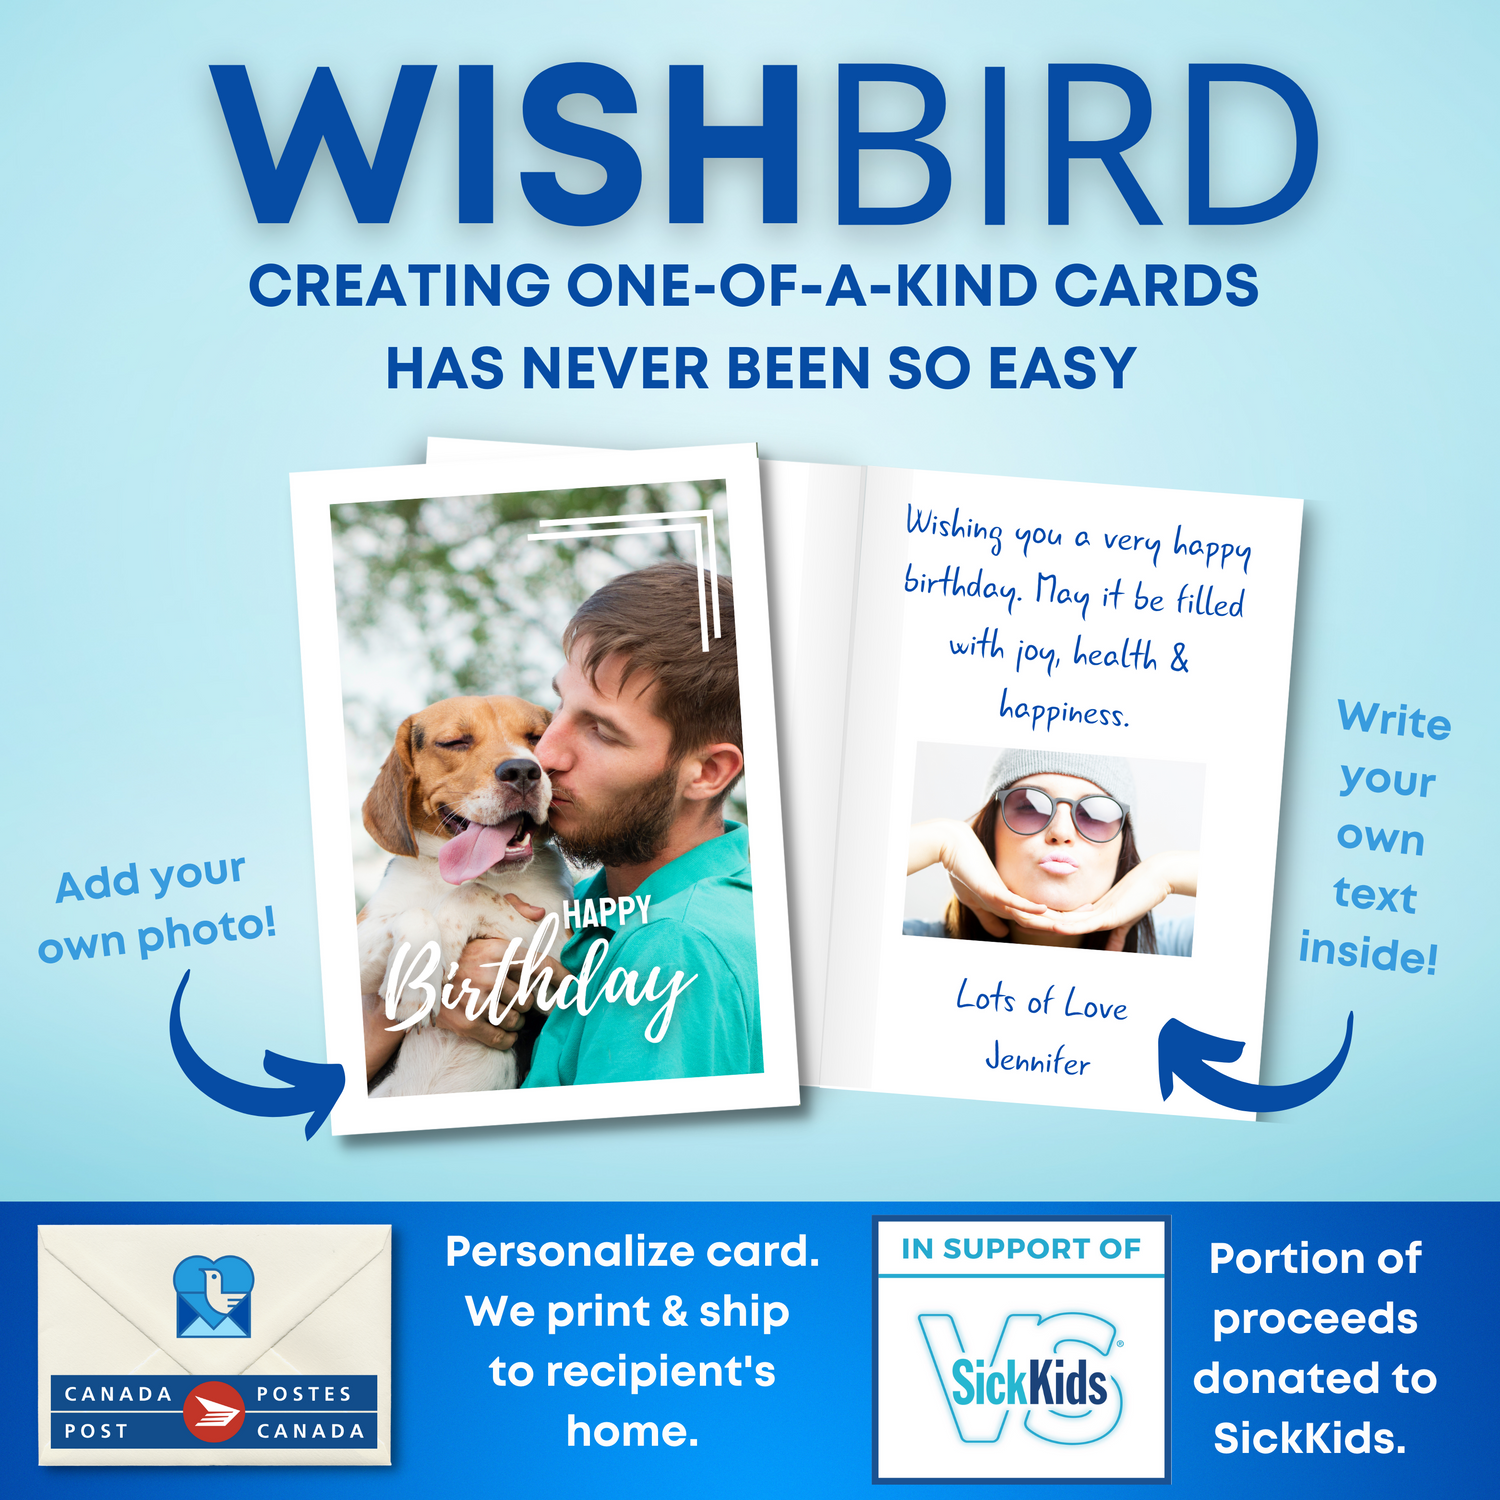 WishBird. Creating one of a kind cards has never been so easy. Personalize your card. We will print & ship it to the recipient's home. Portion of proceeds is donated to SickKids Foundation.